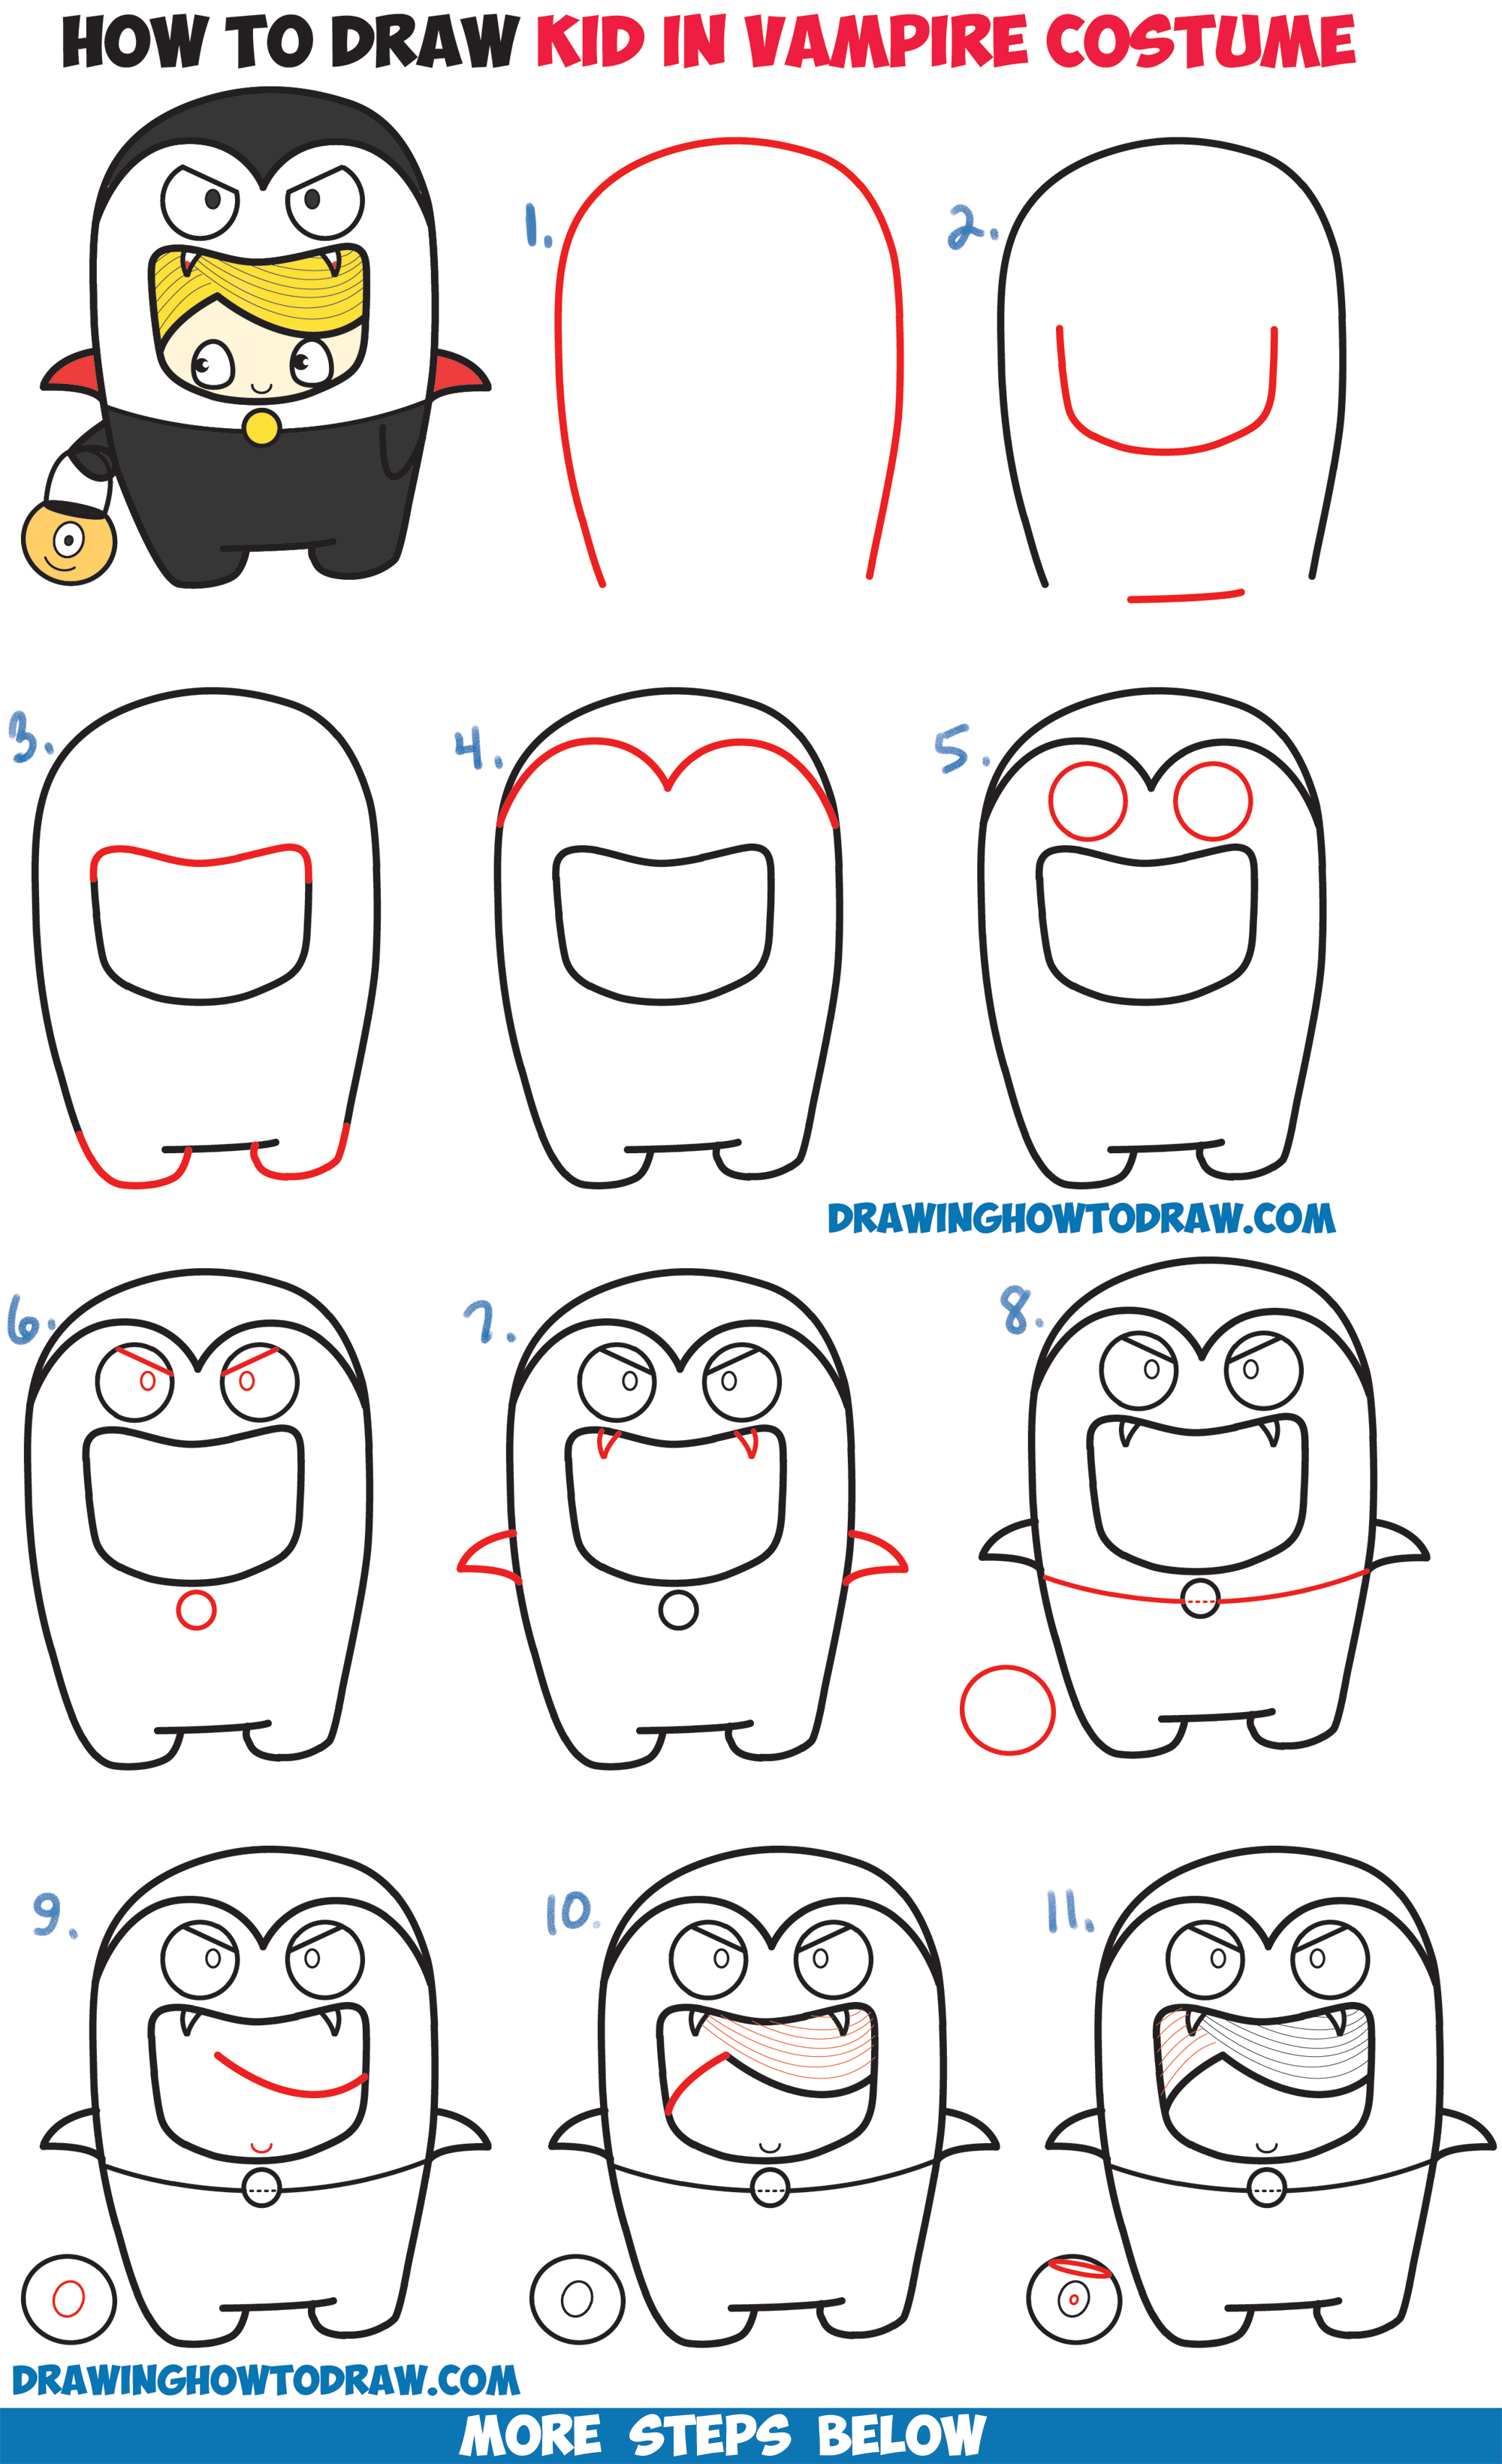 How to Draw a Cartoon Vampires for Halloween with Easy Step by Step Drawing  Tutorial - How to Draw Step by Step Drawing Tutorials